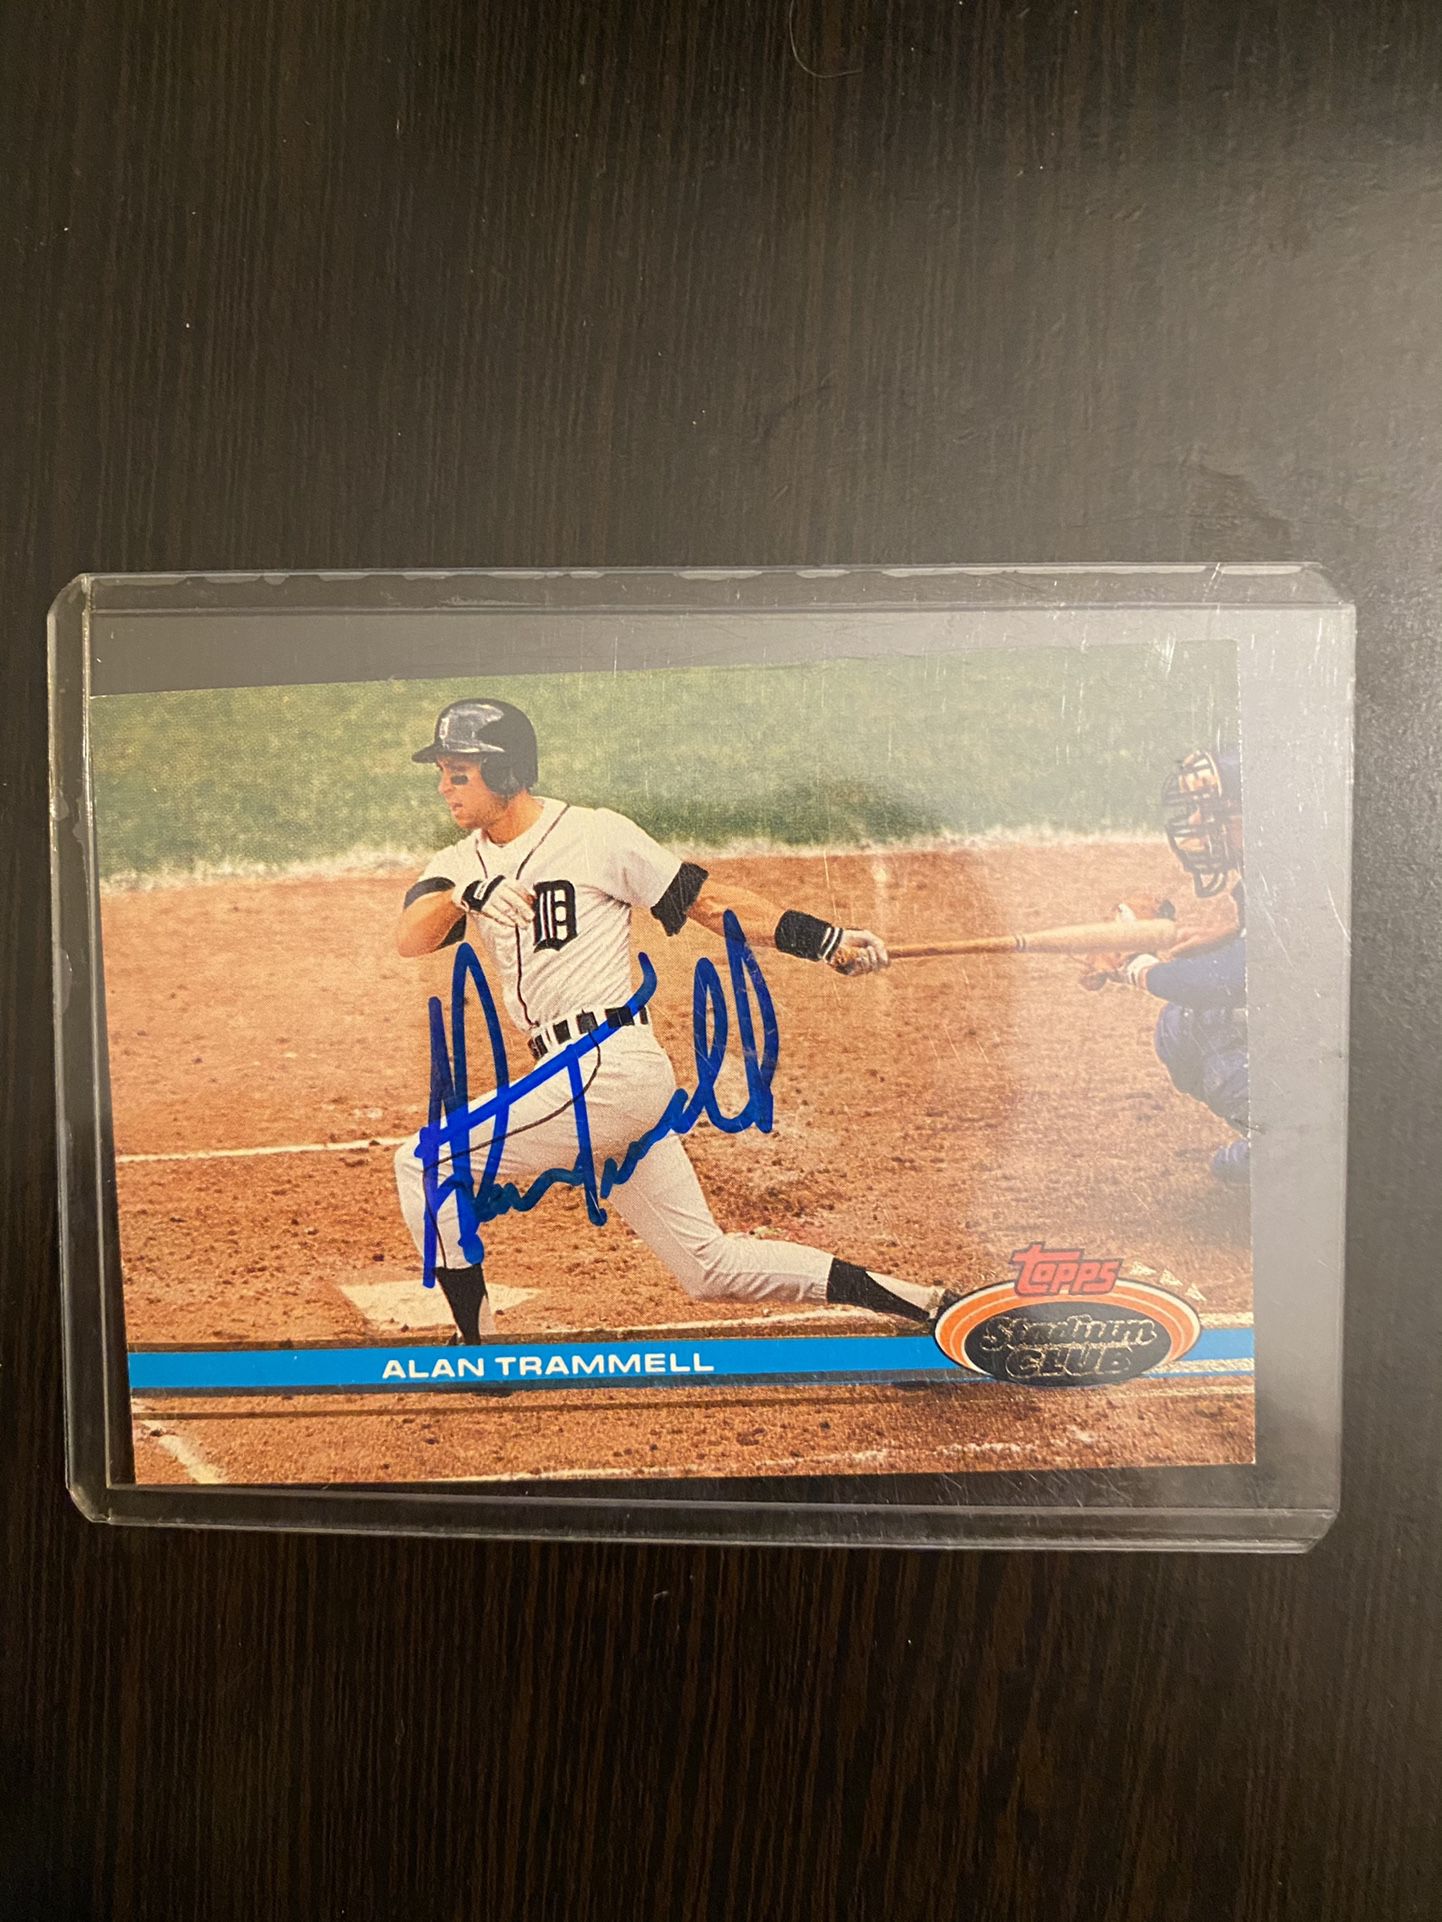 Detroit tigers Alan Trammell Autograph Baseball Card for Sale in